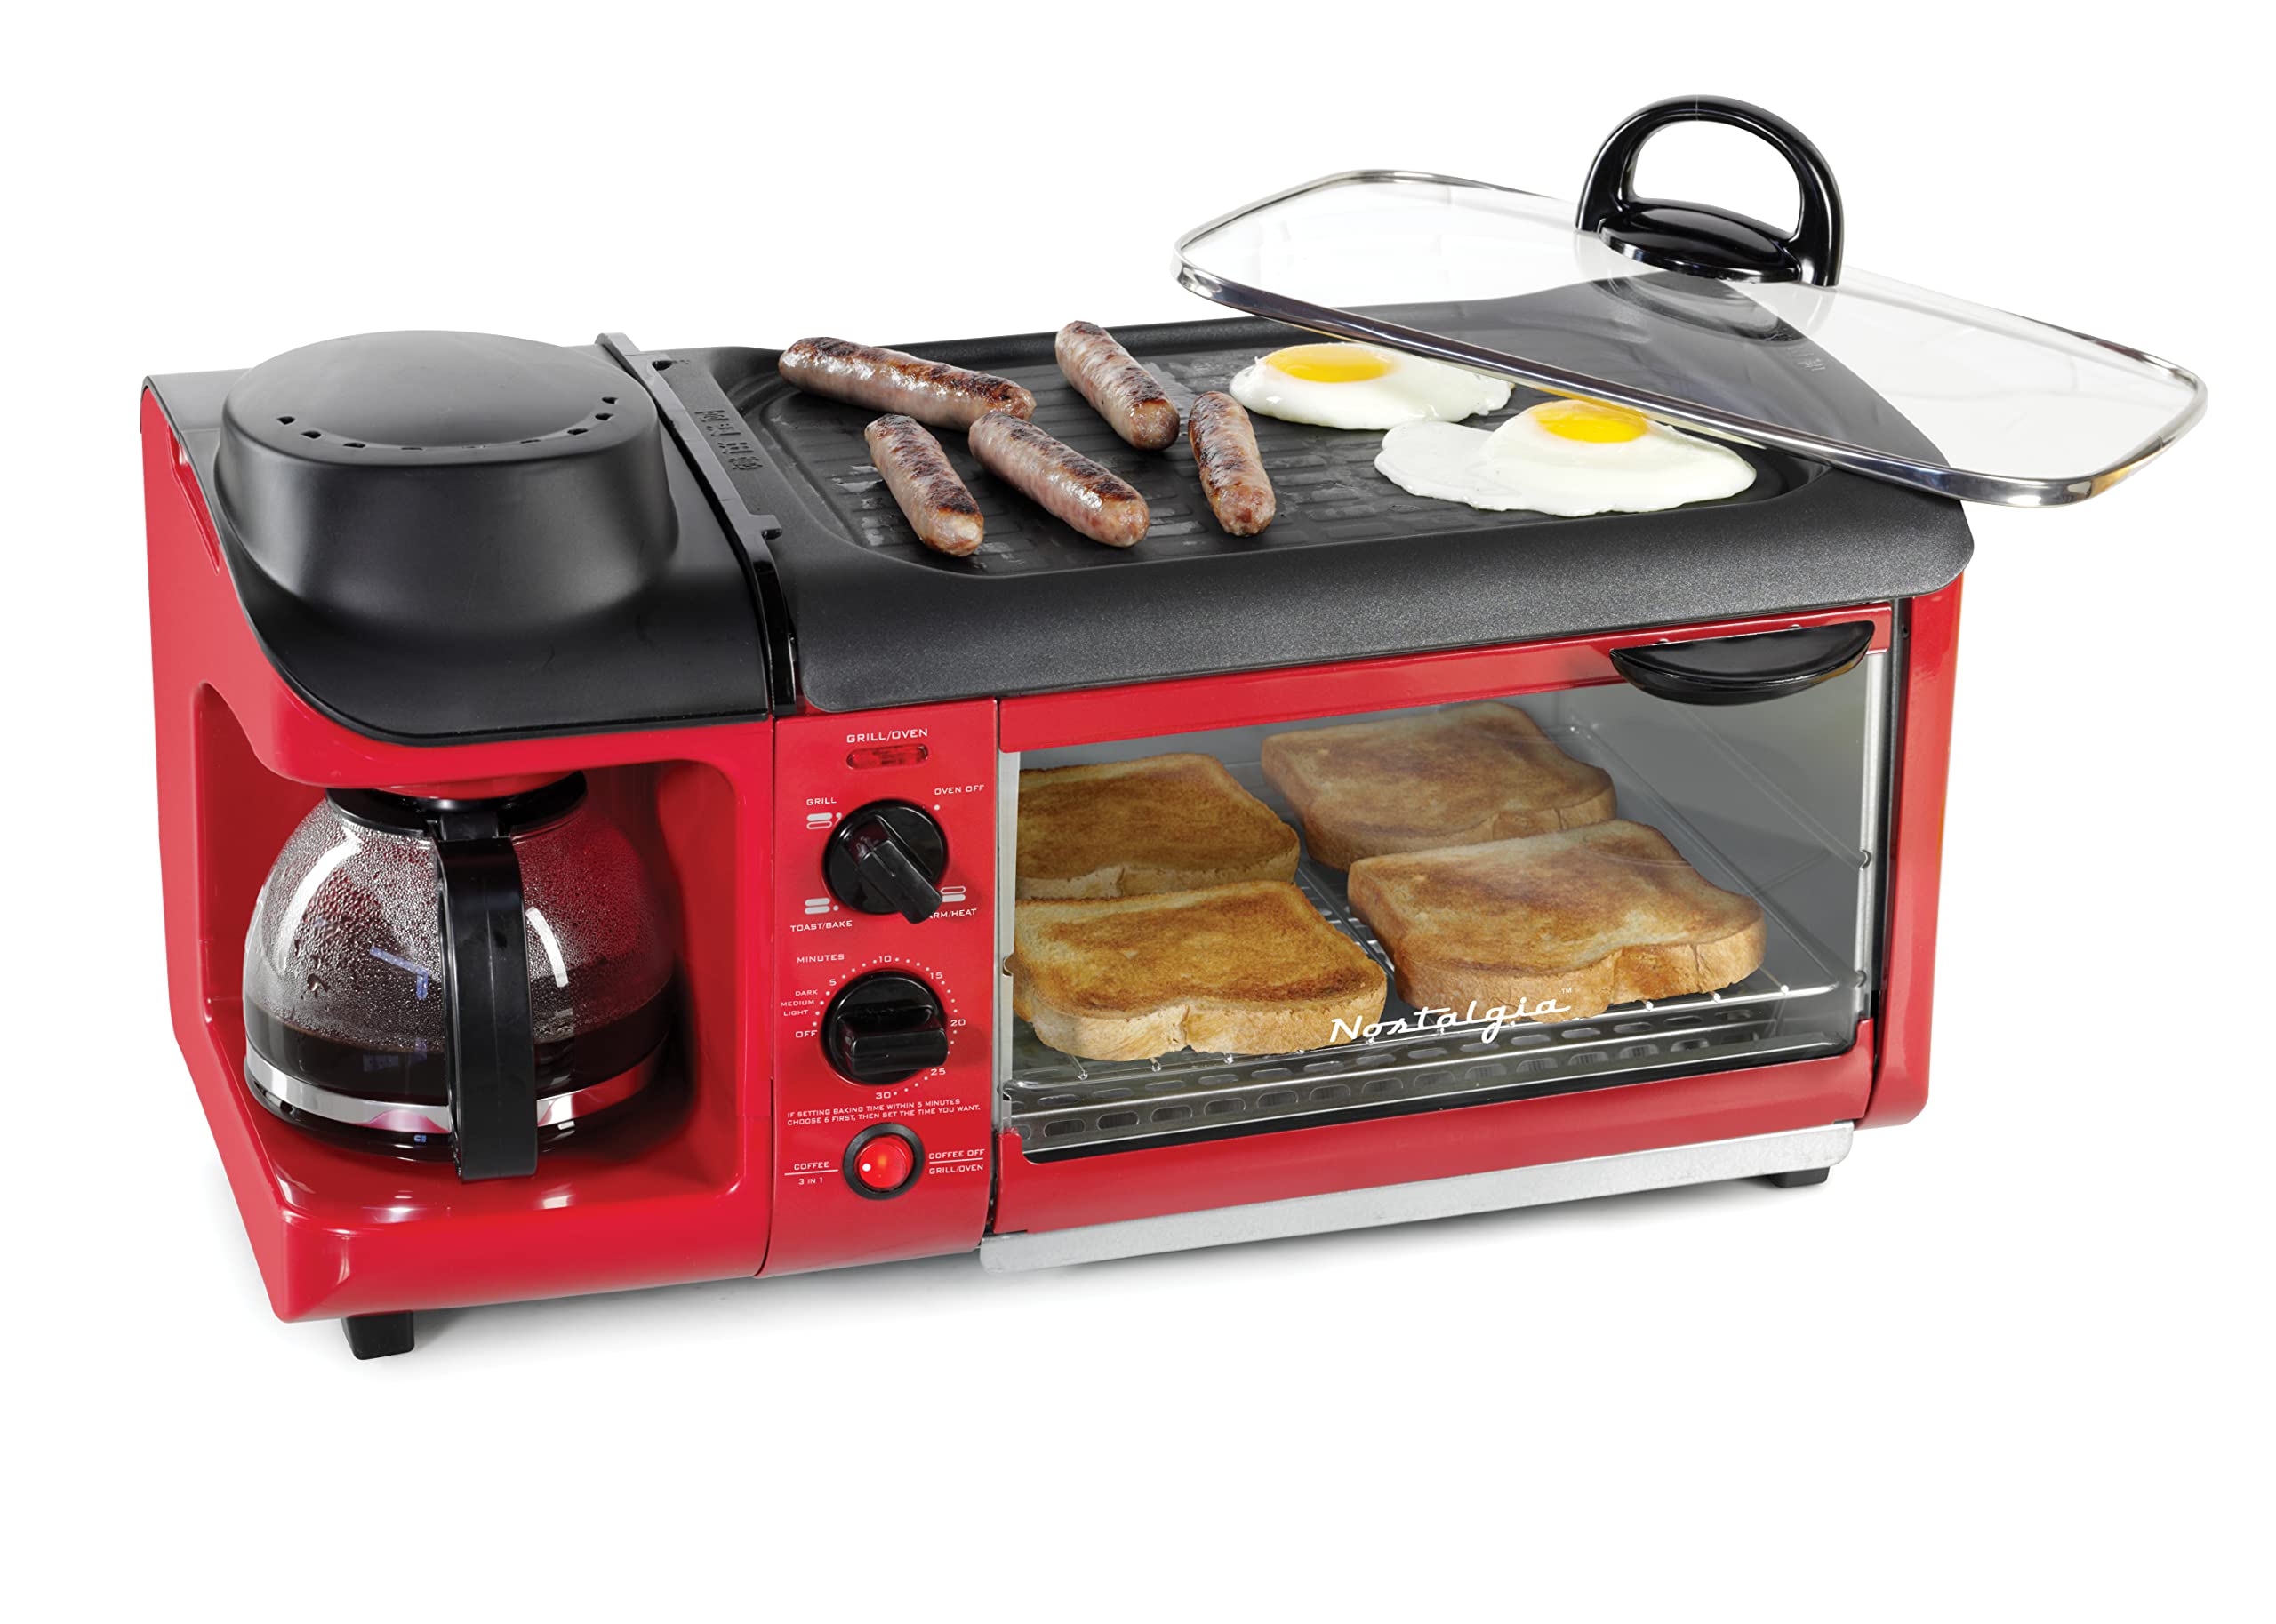 Nostalgia 3-in-1 Breakfast Station - Includes Coffee Maker, Non-Stick Griddle, and 4-Slice Toaster Oven - Versatile Breakfast Maker with Timer - Red